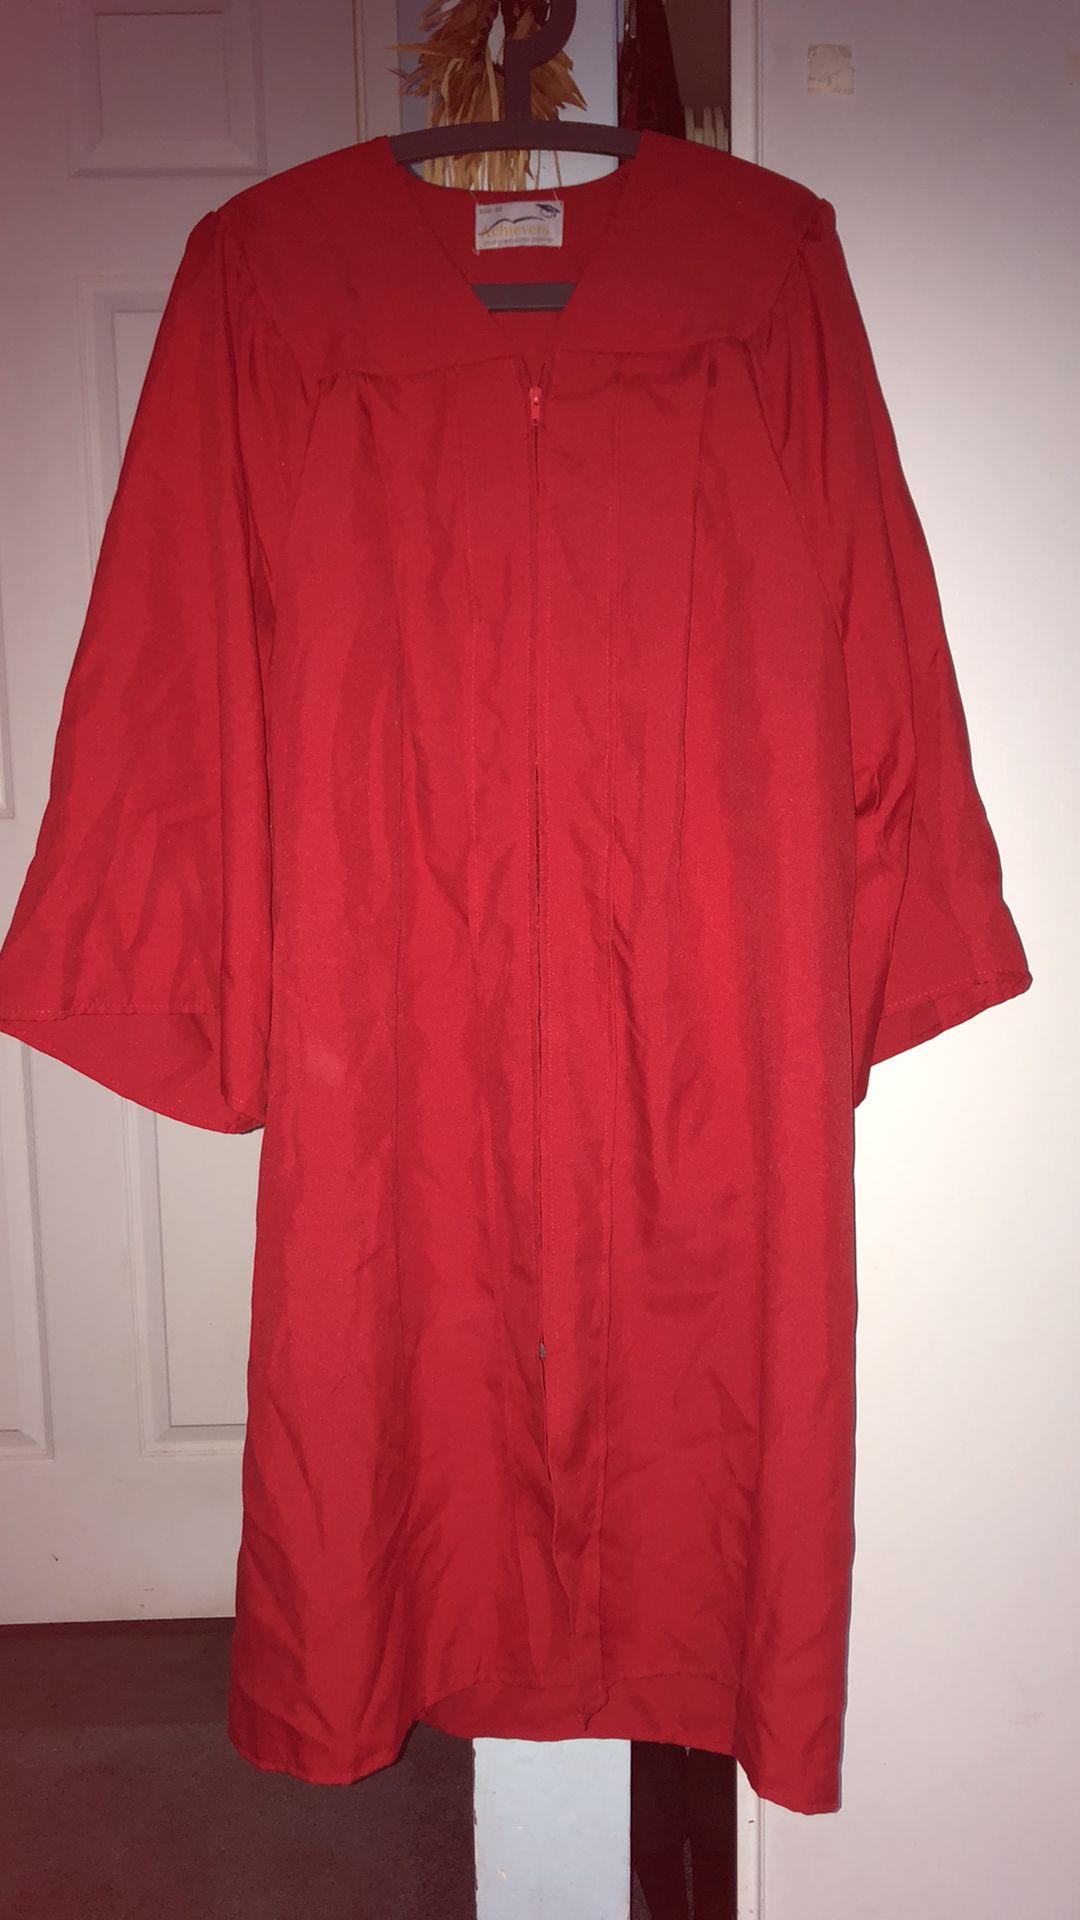 Red Graduation Gown: Fits 5’0 - 5’2 ft